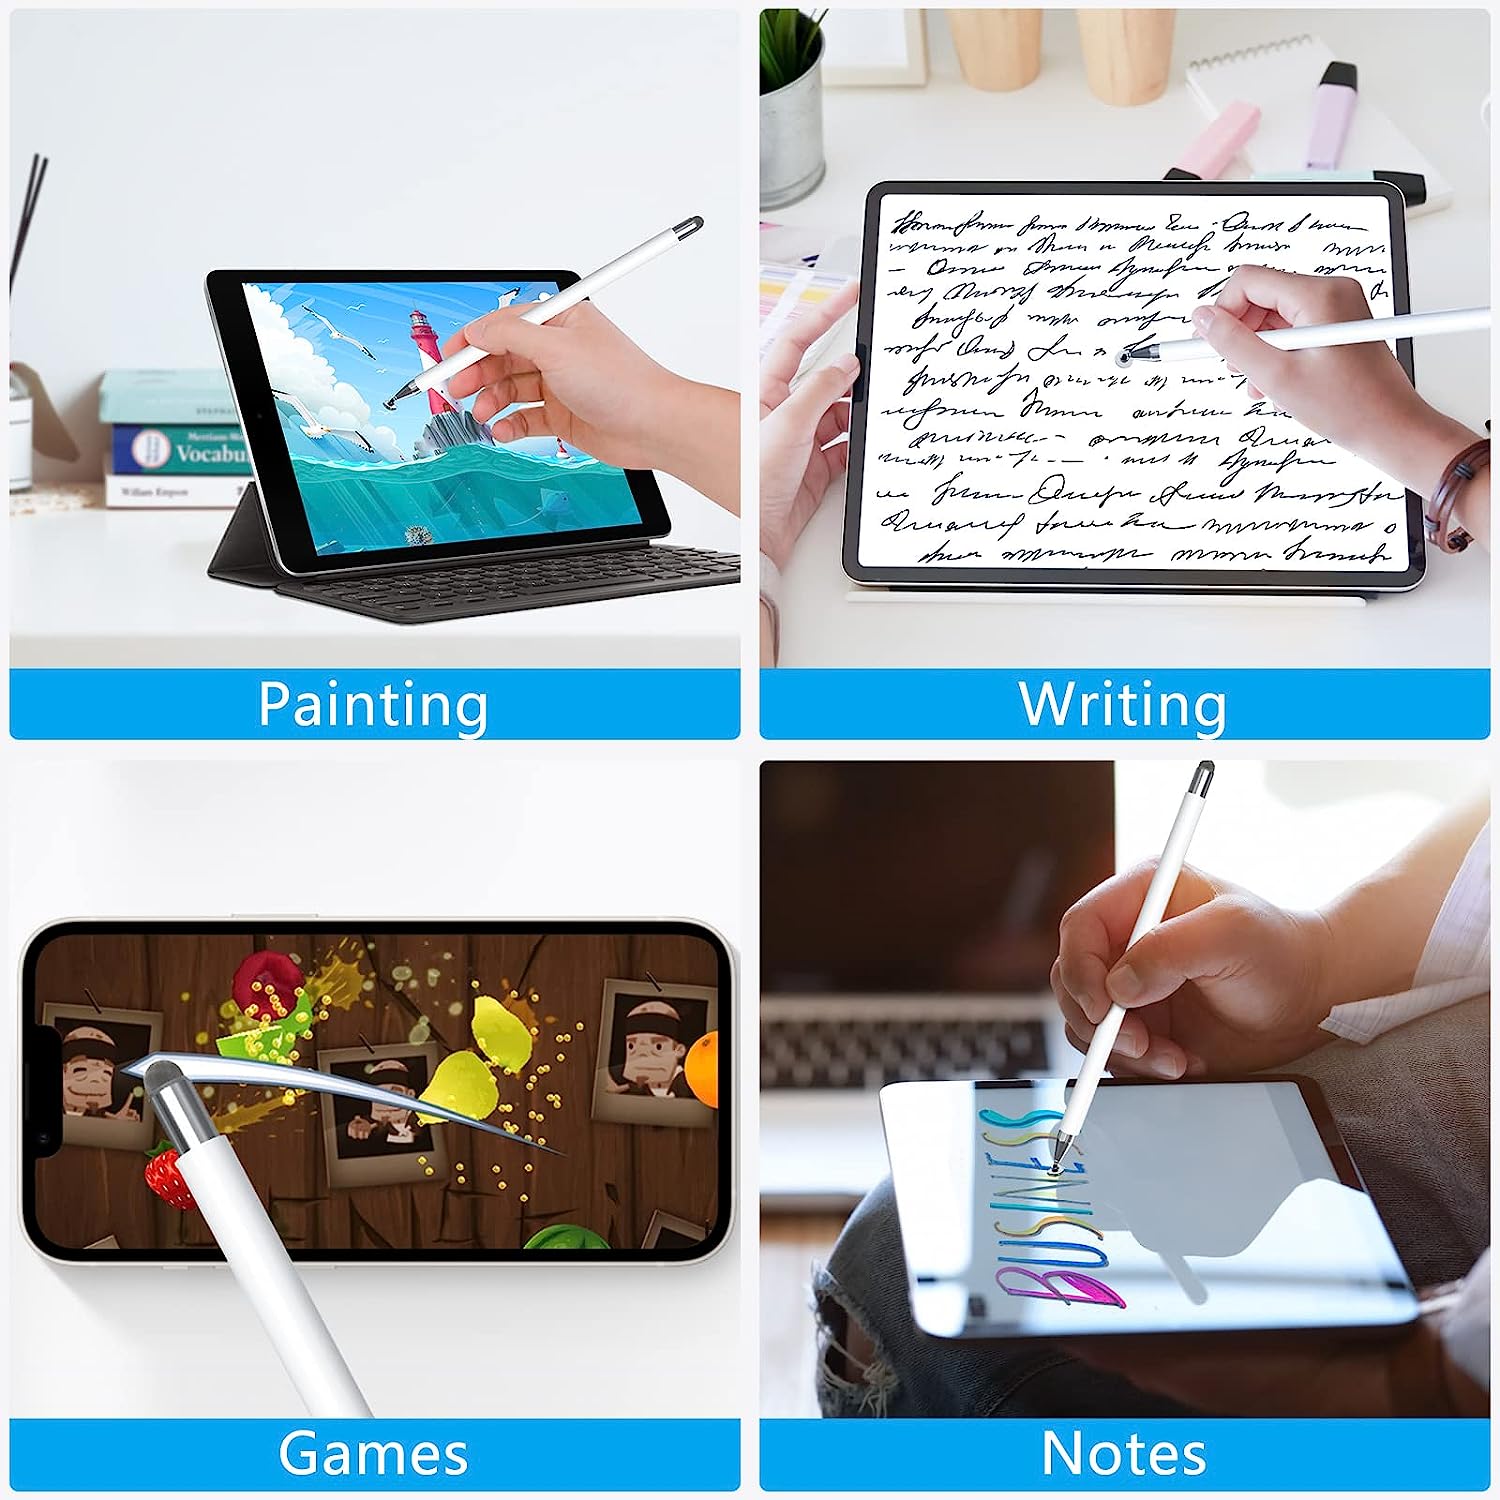 Stylus Pen for Touch Screens, IOS and Android